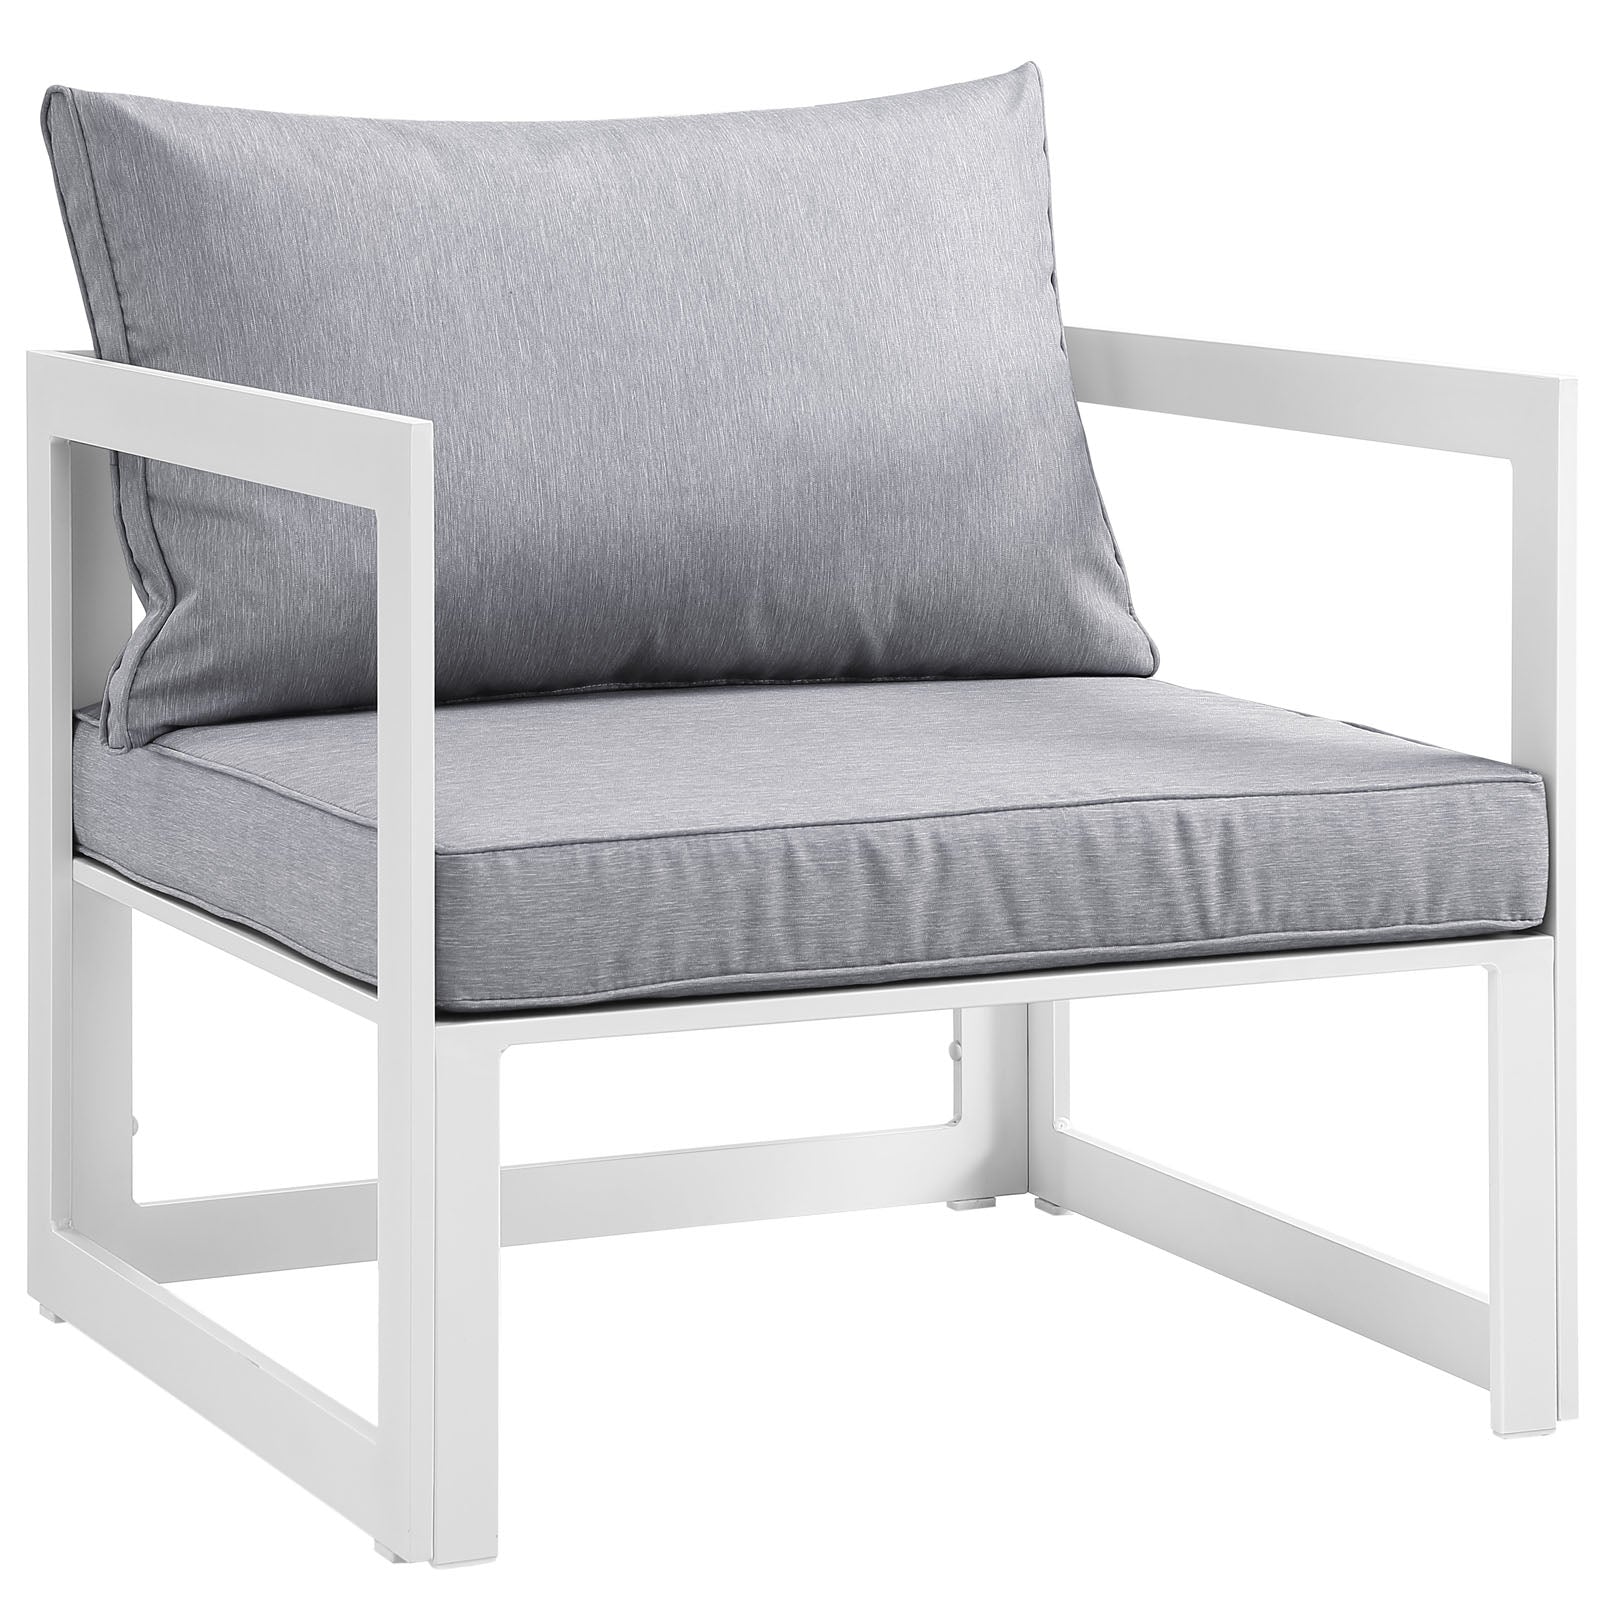 Modway Outdoor Conversation Sets - Fortuna 3 Piece Outdoor Patio Sectional Sofa Set White Gray